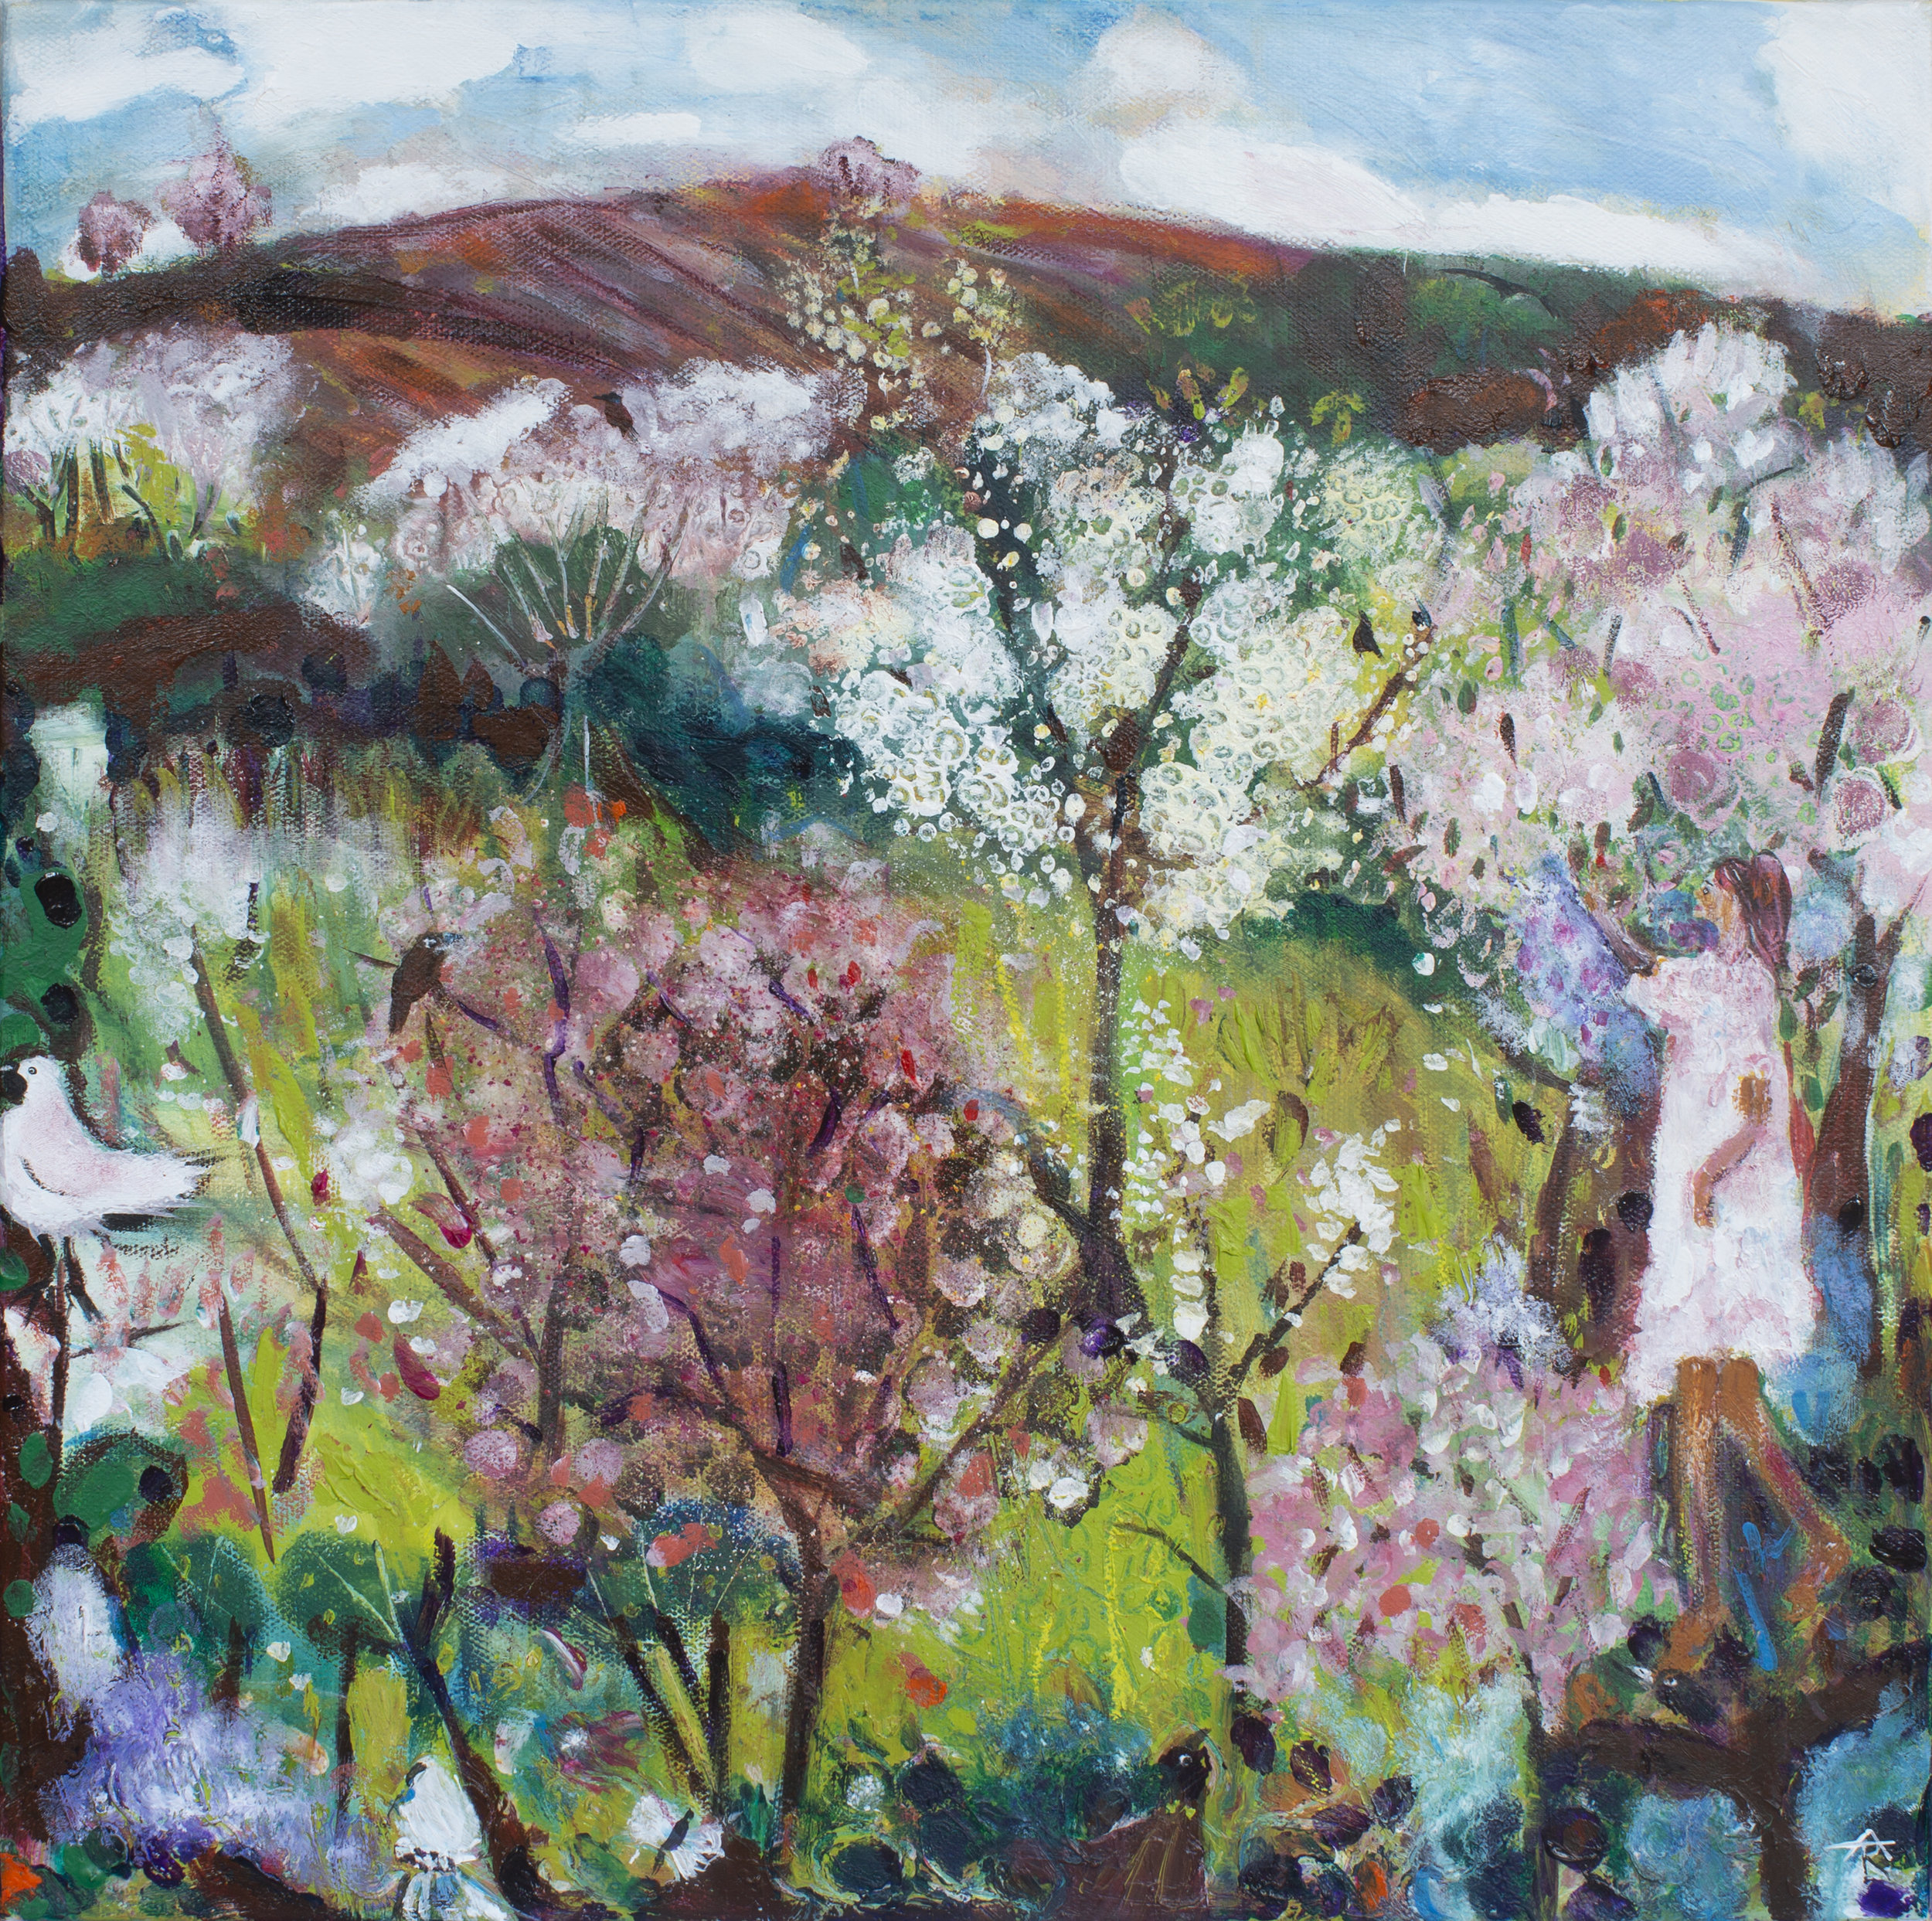 Daydreaming In The Blossom, acrylic on canvas, 46 x 46 cm, SOLD